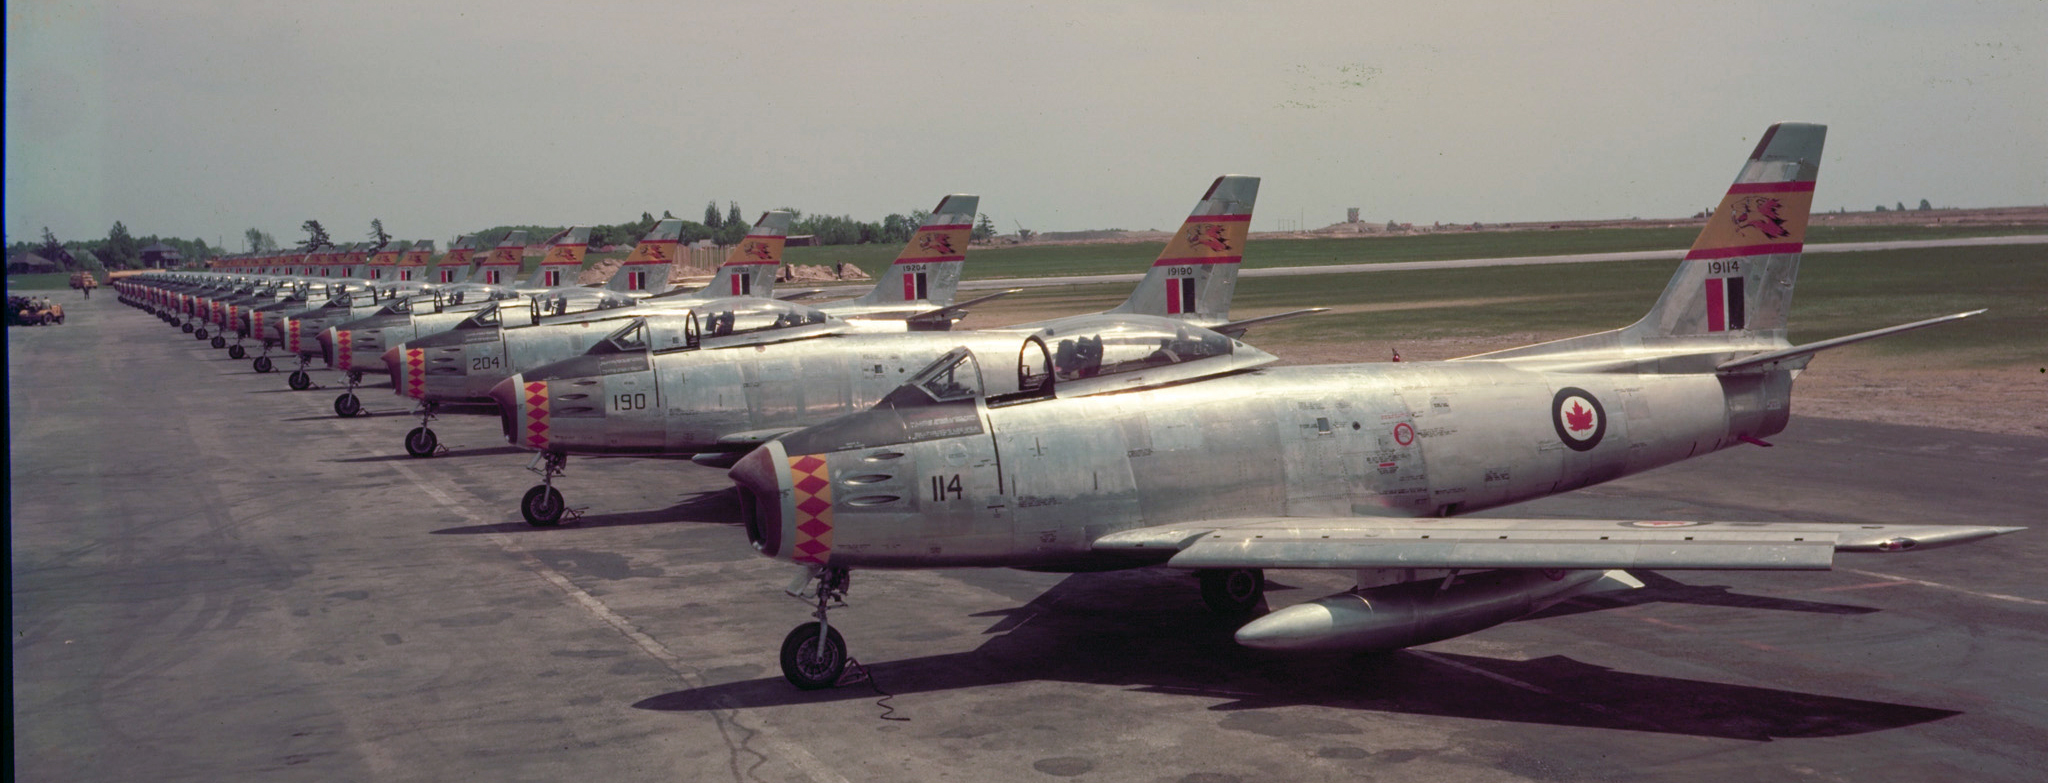 F-86 Sabres from 439 Squadron are lined up on the tarmac at Uplands in Ottawa. PHOTO: DND Archives, PC-81 